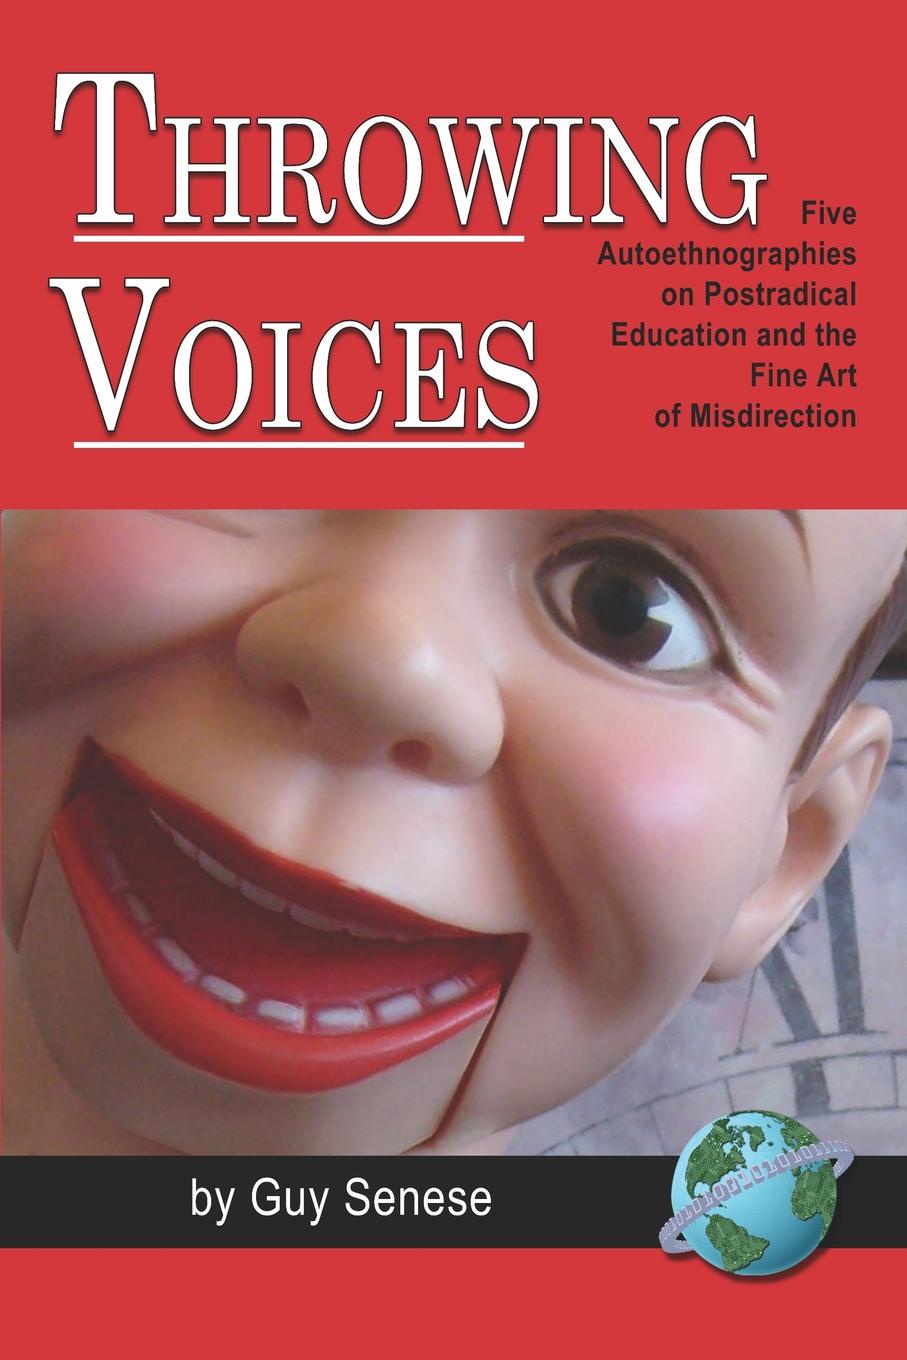 Throwing Voices. Five Autoethnographies on Postradical Education and the Fine Art of Misdirection (PB)